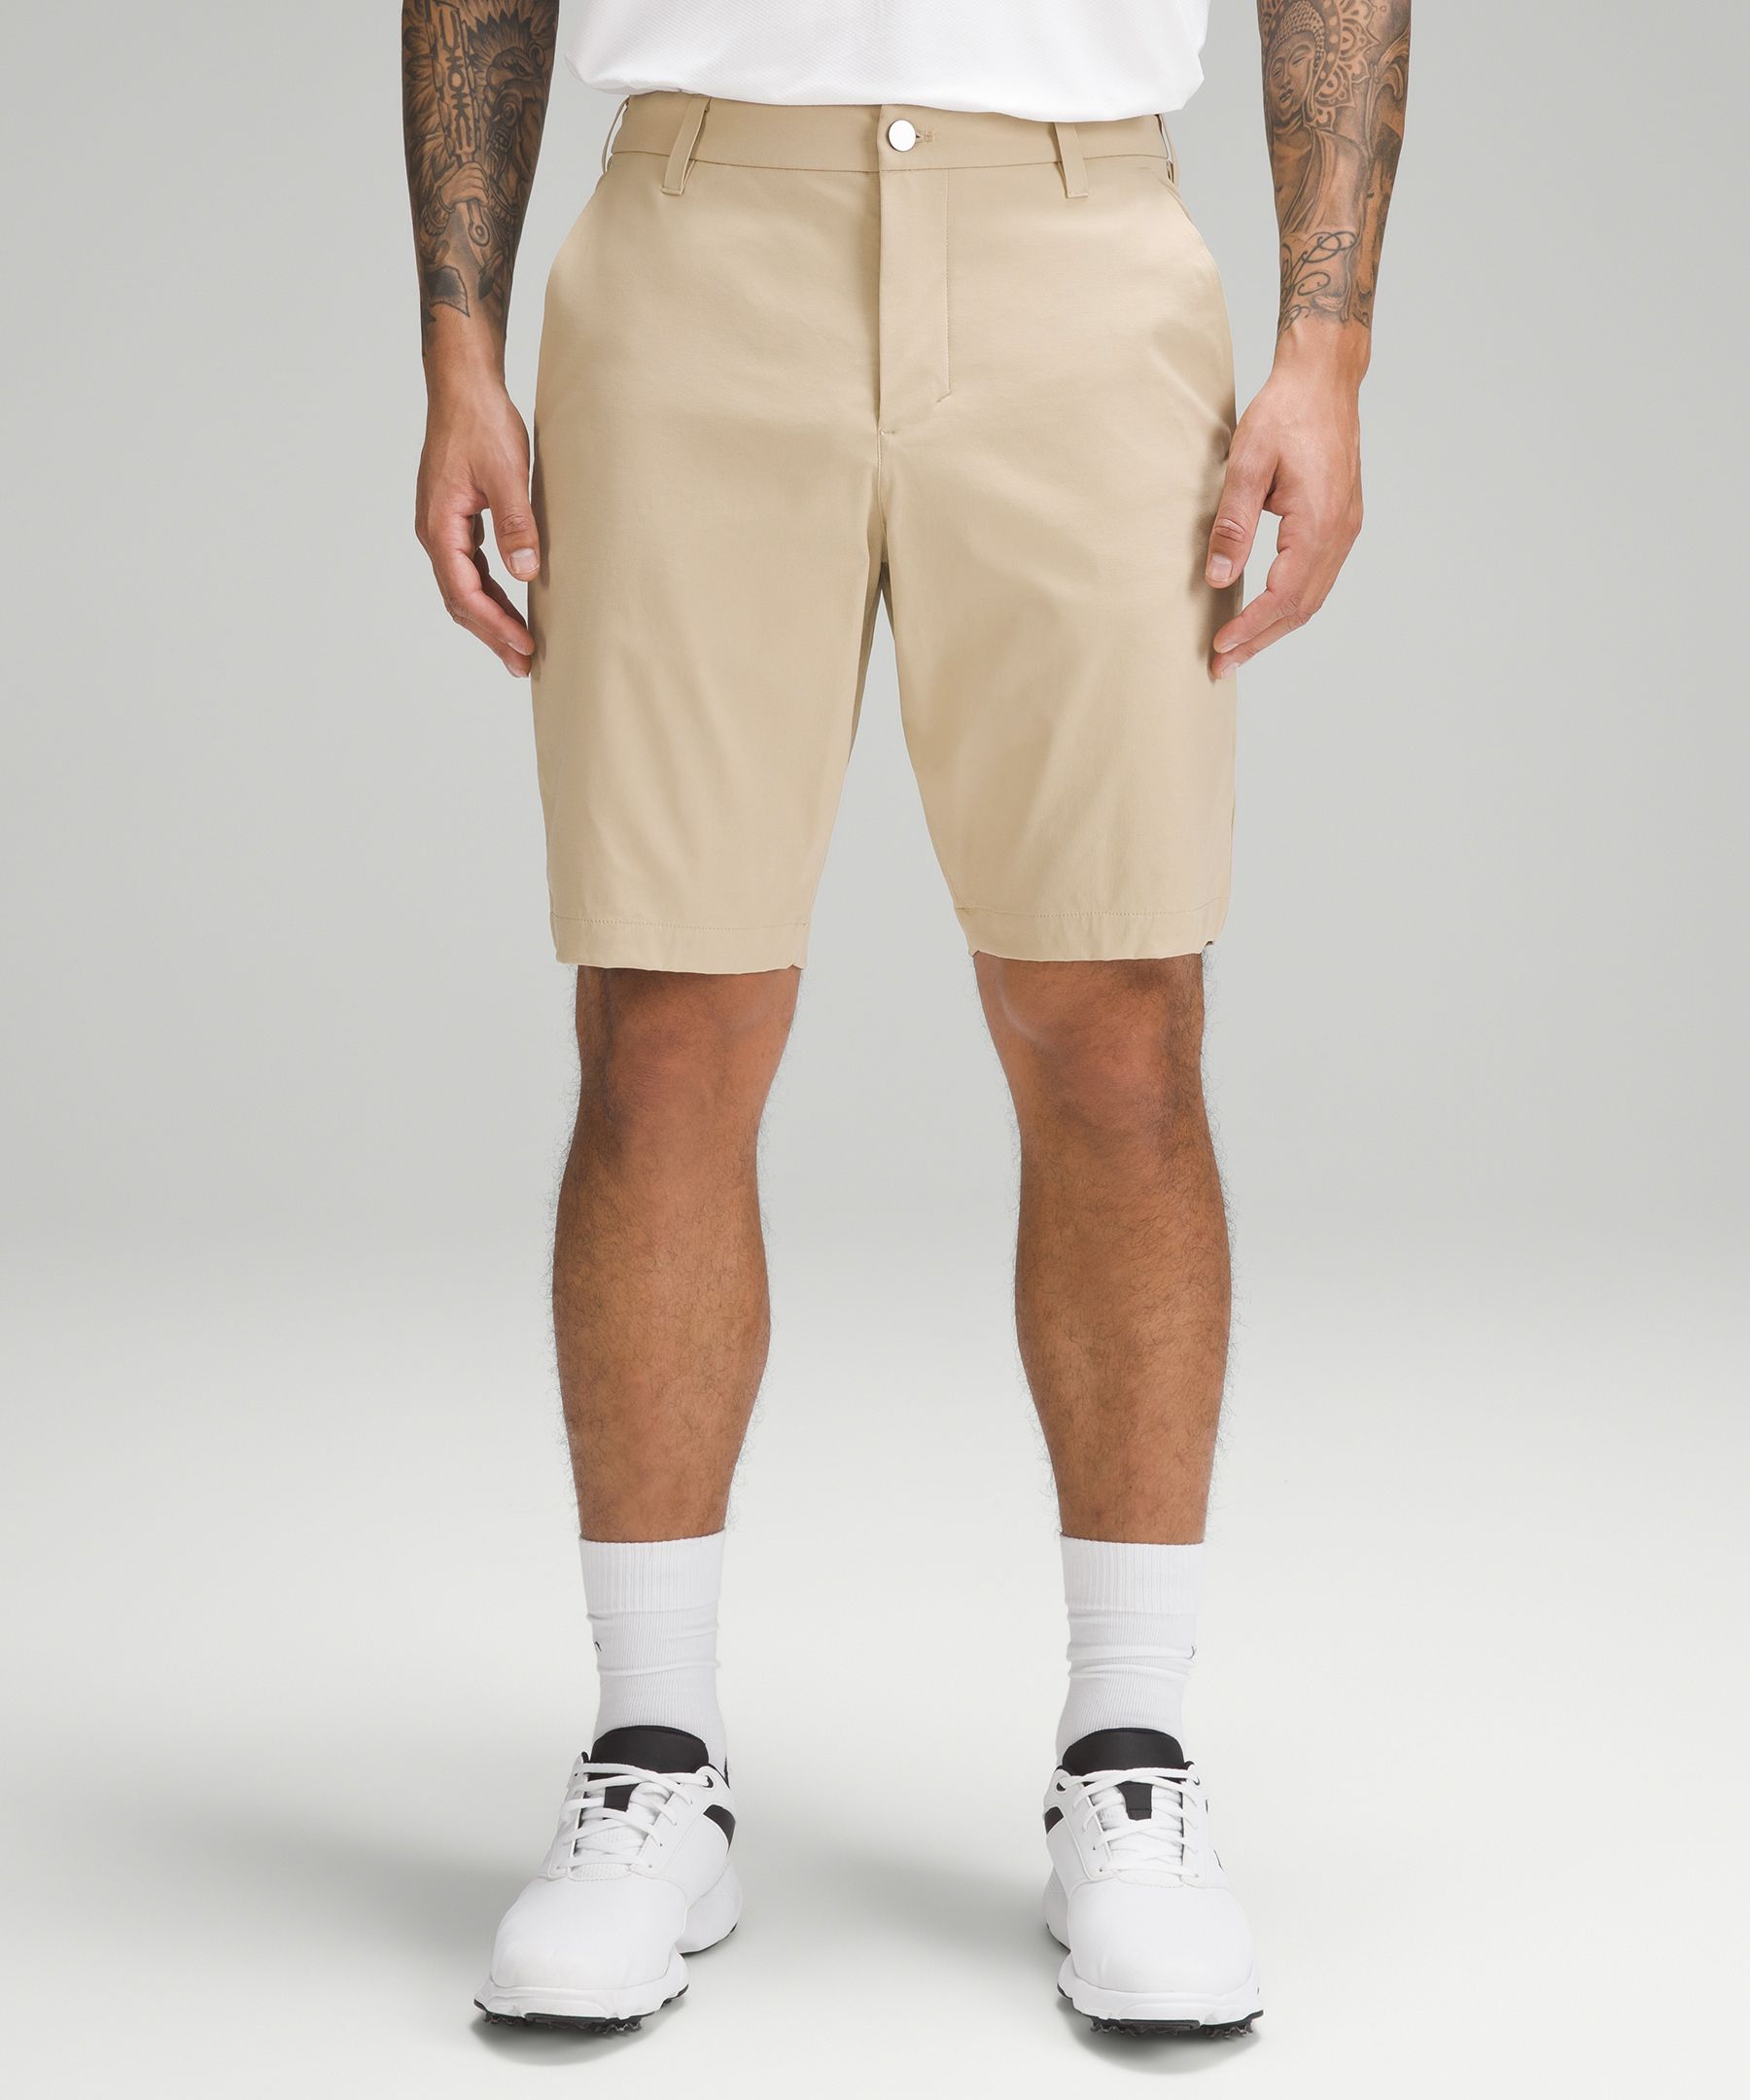 Lululemon Commission Golf Shorts 10 In Trench